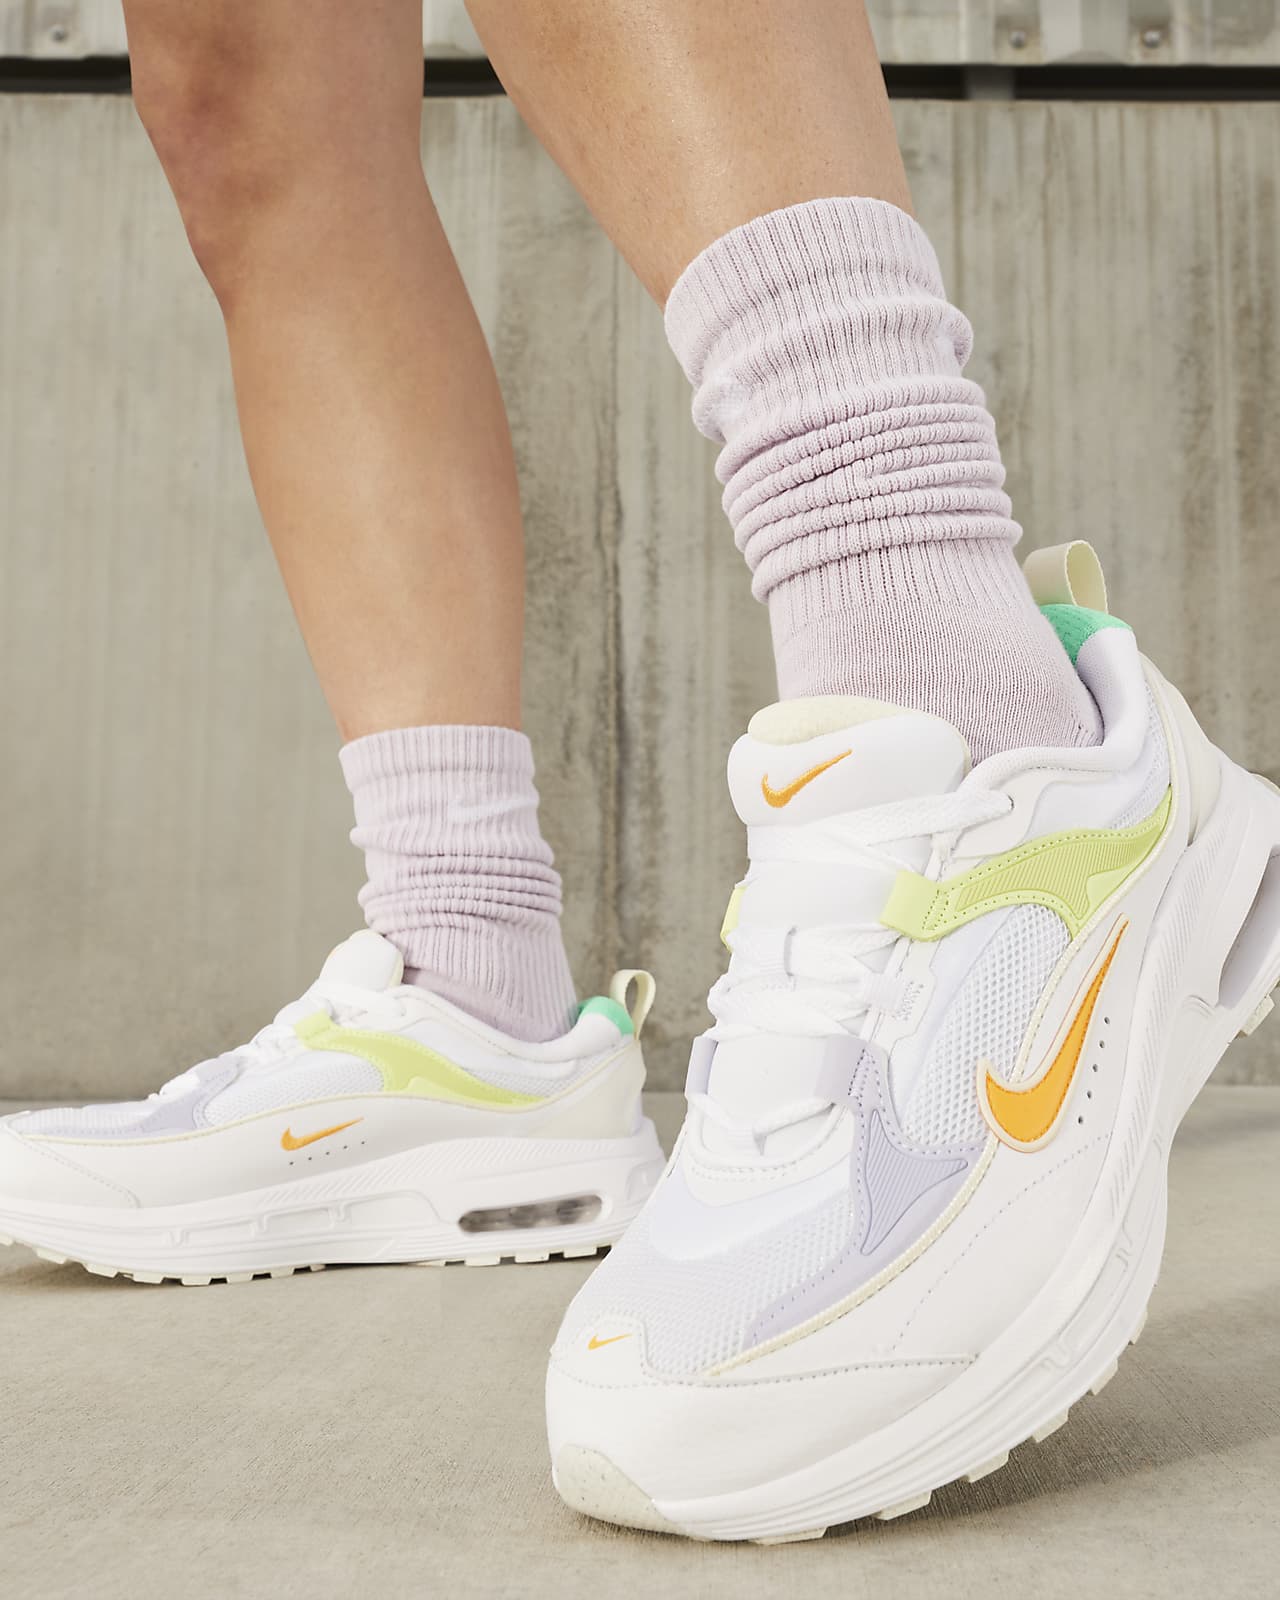 Nike Air Max Bliss Women's Shoes